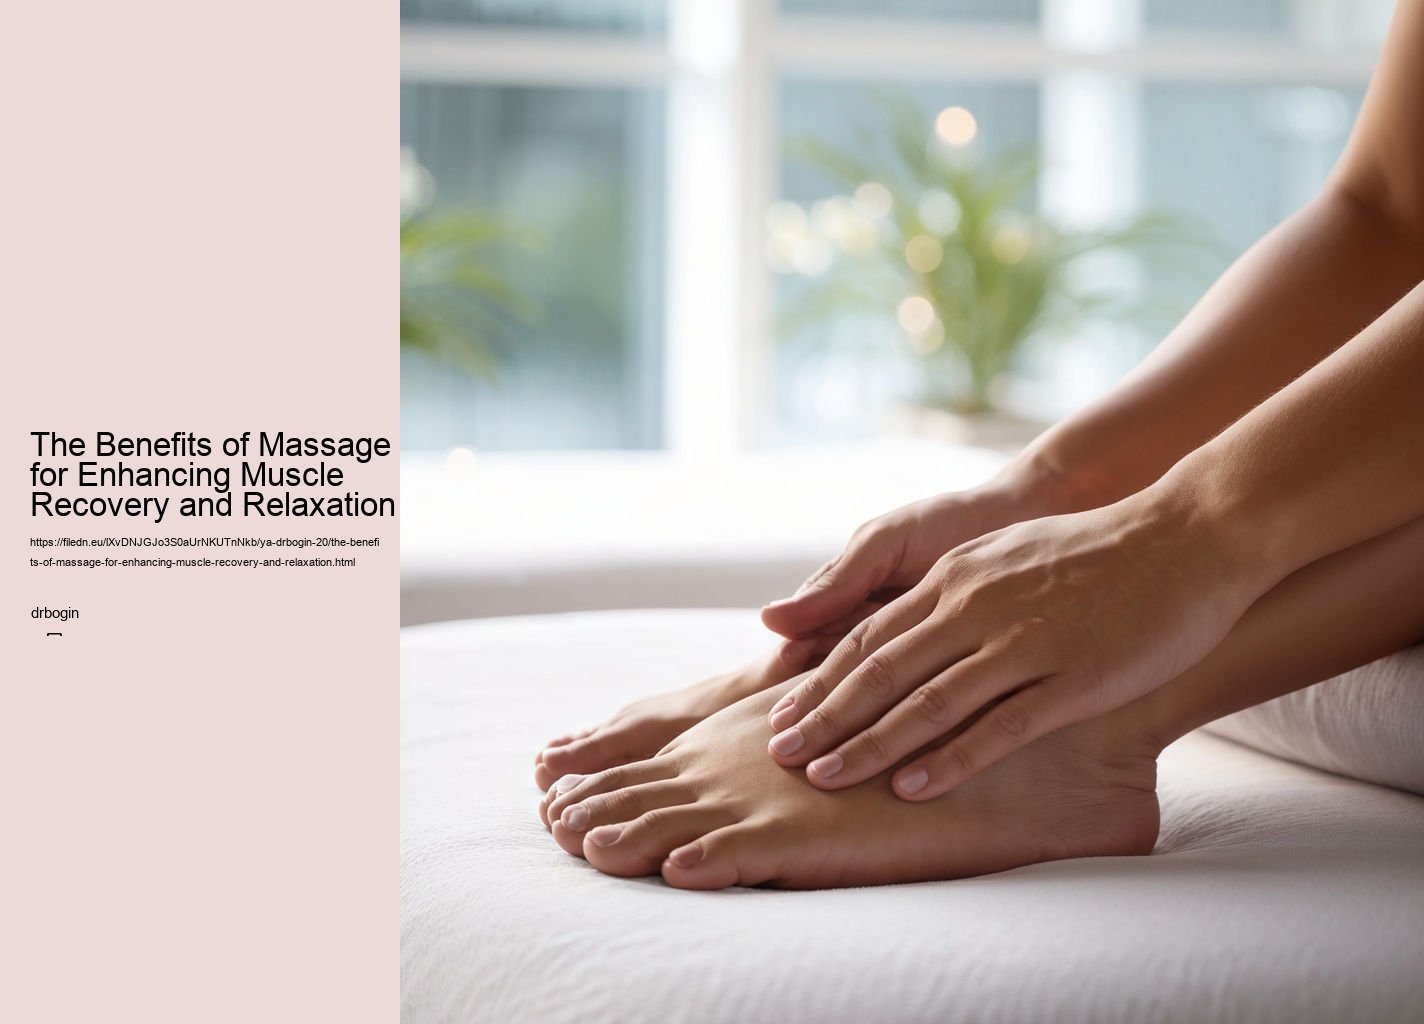 The Benefits of Massage for Enhancing Muscle Recovery and Relaxation